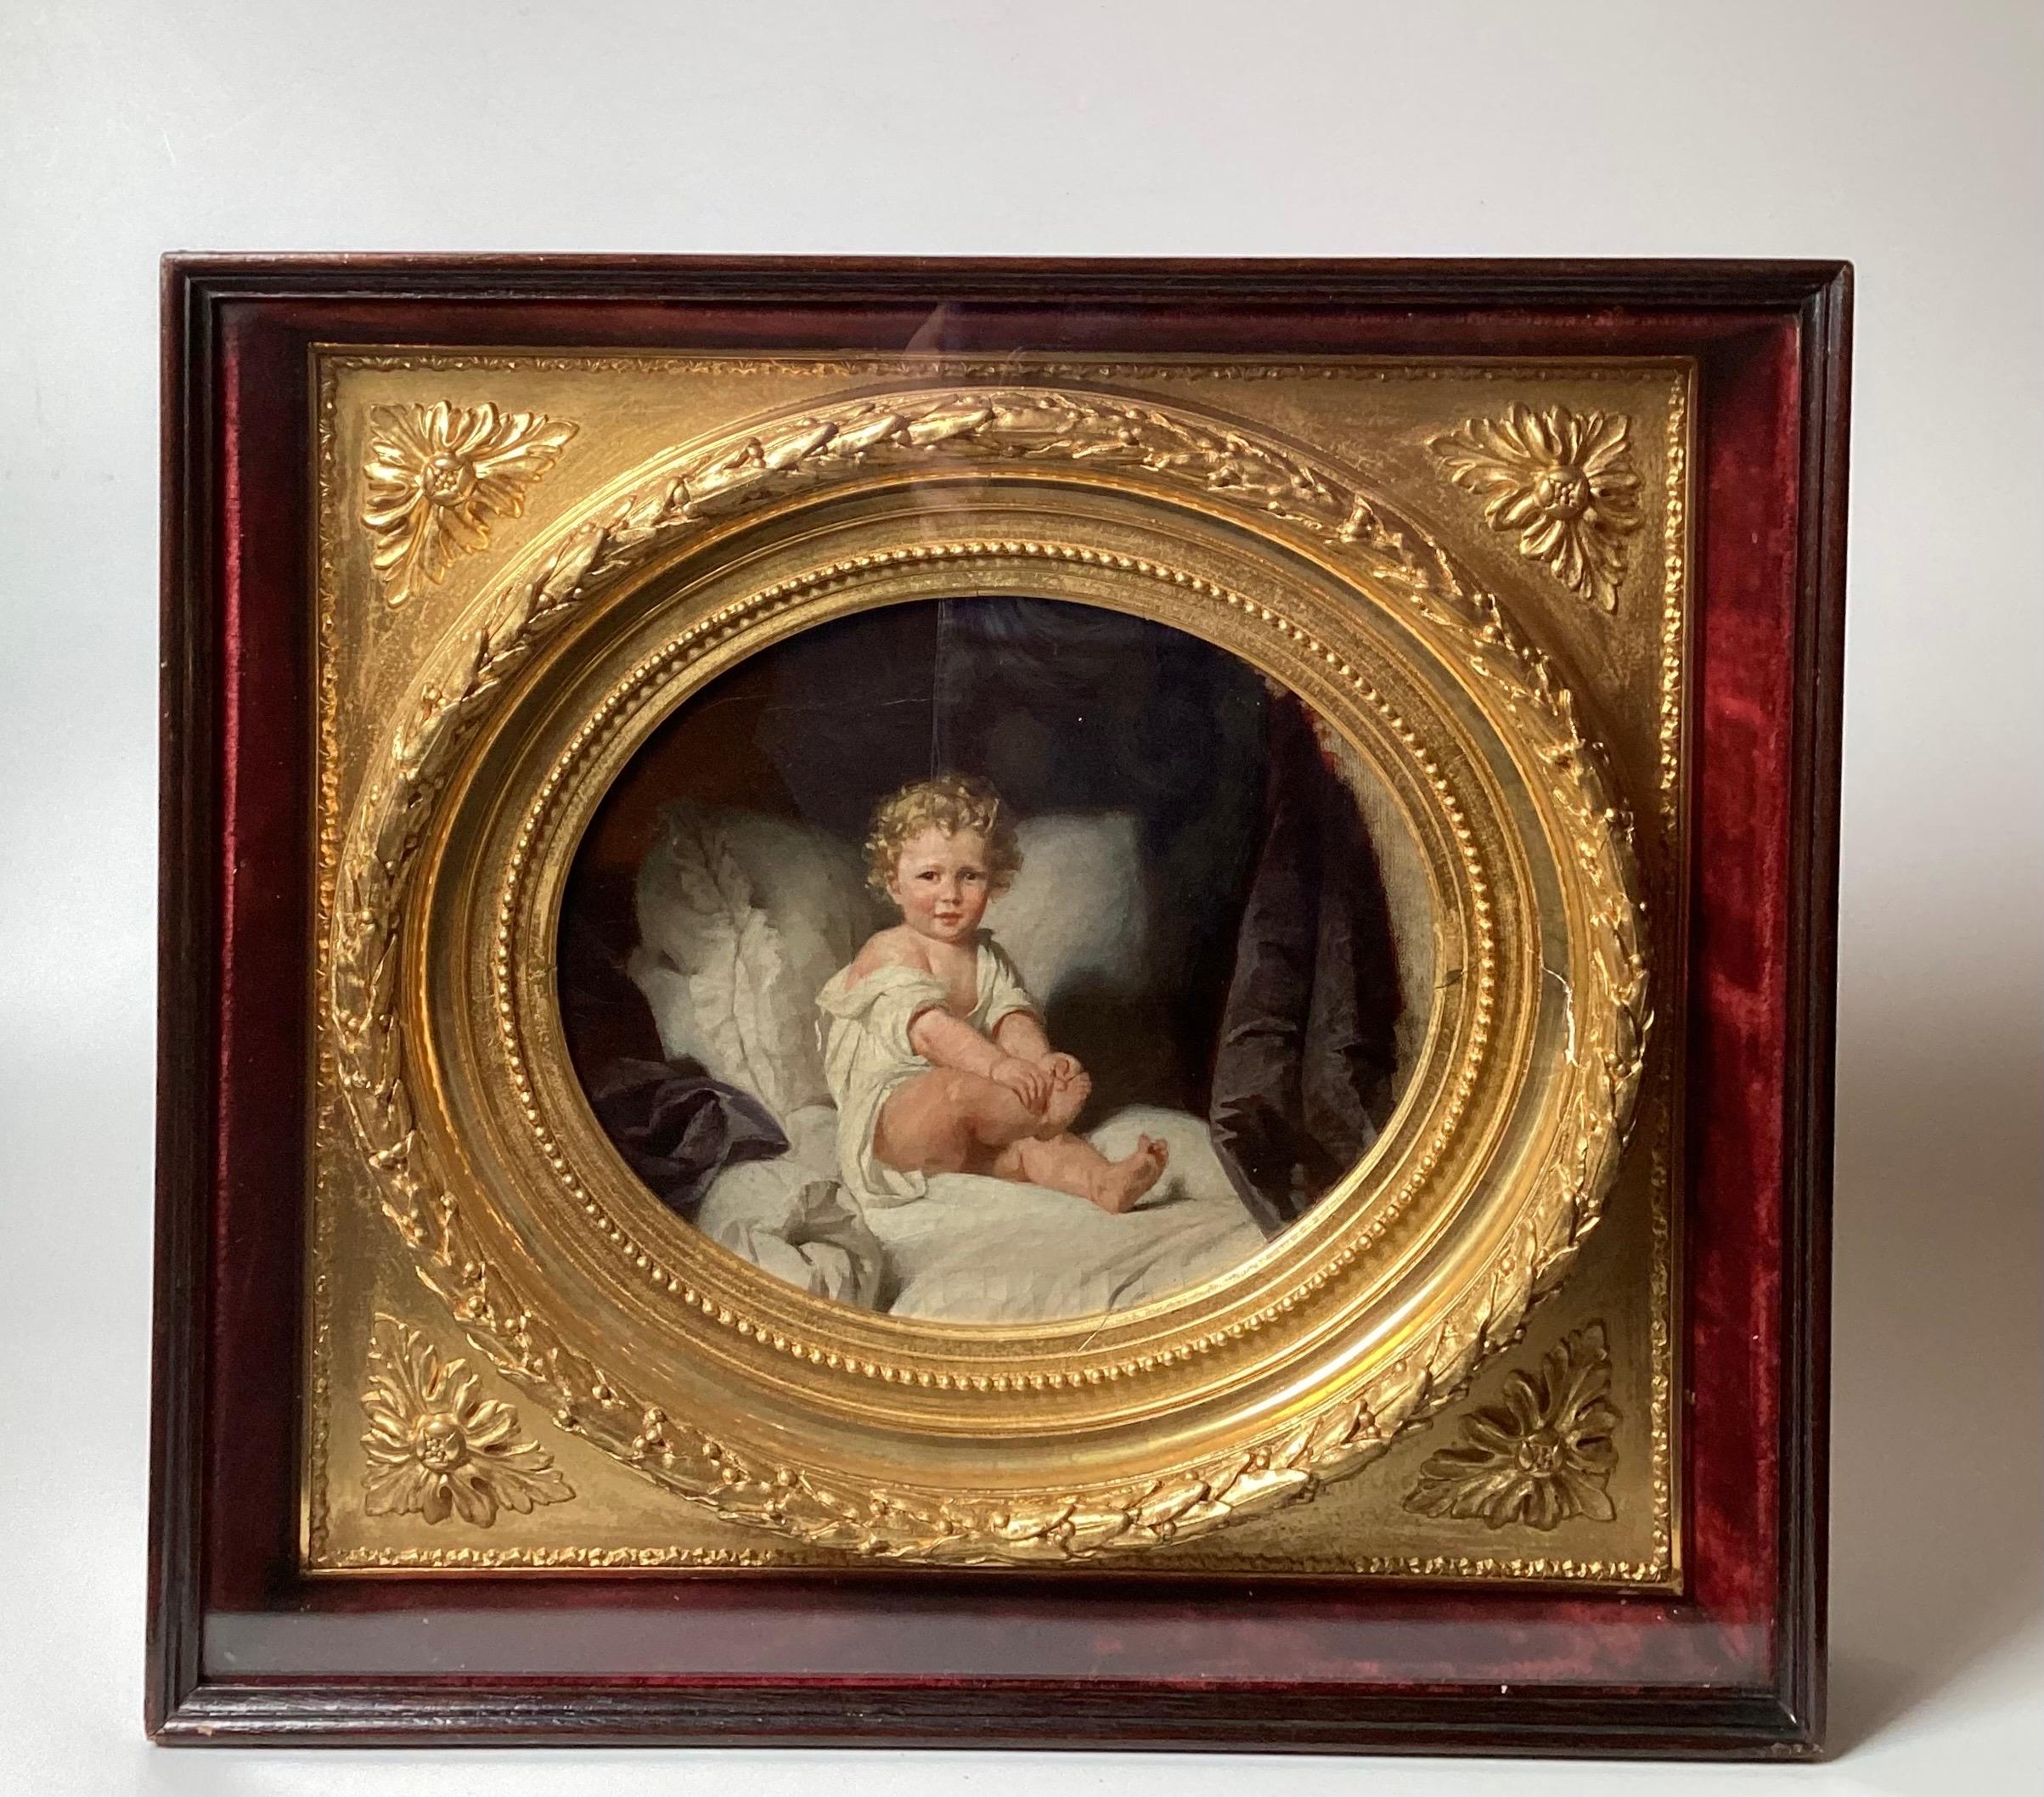 Beautiful Portrait of Young Boy with GOlden Hair in a Stunning Original giltwood For Sale 7